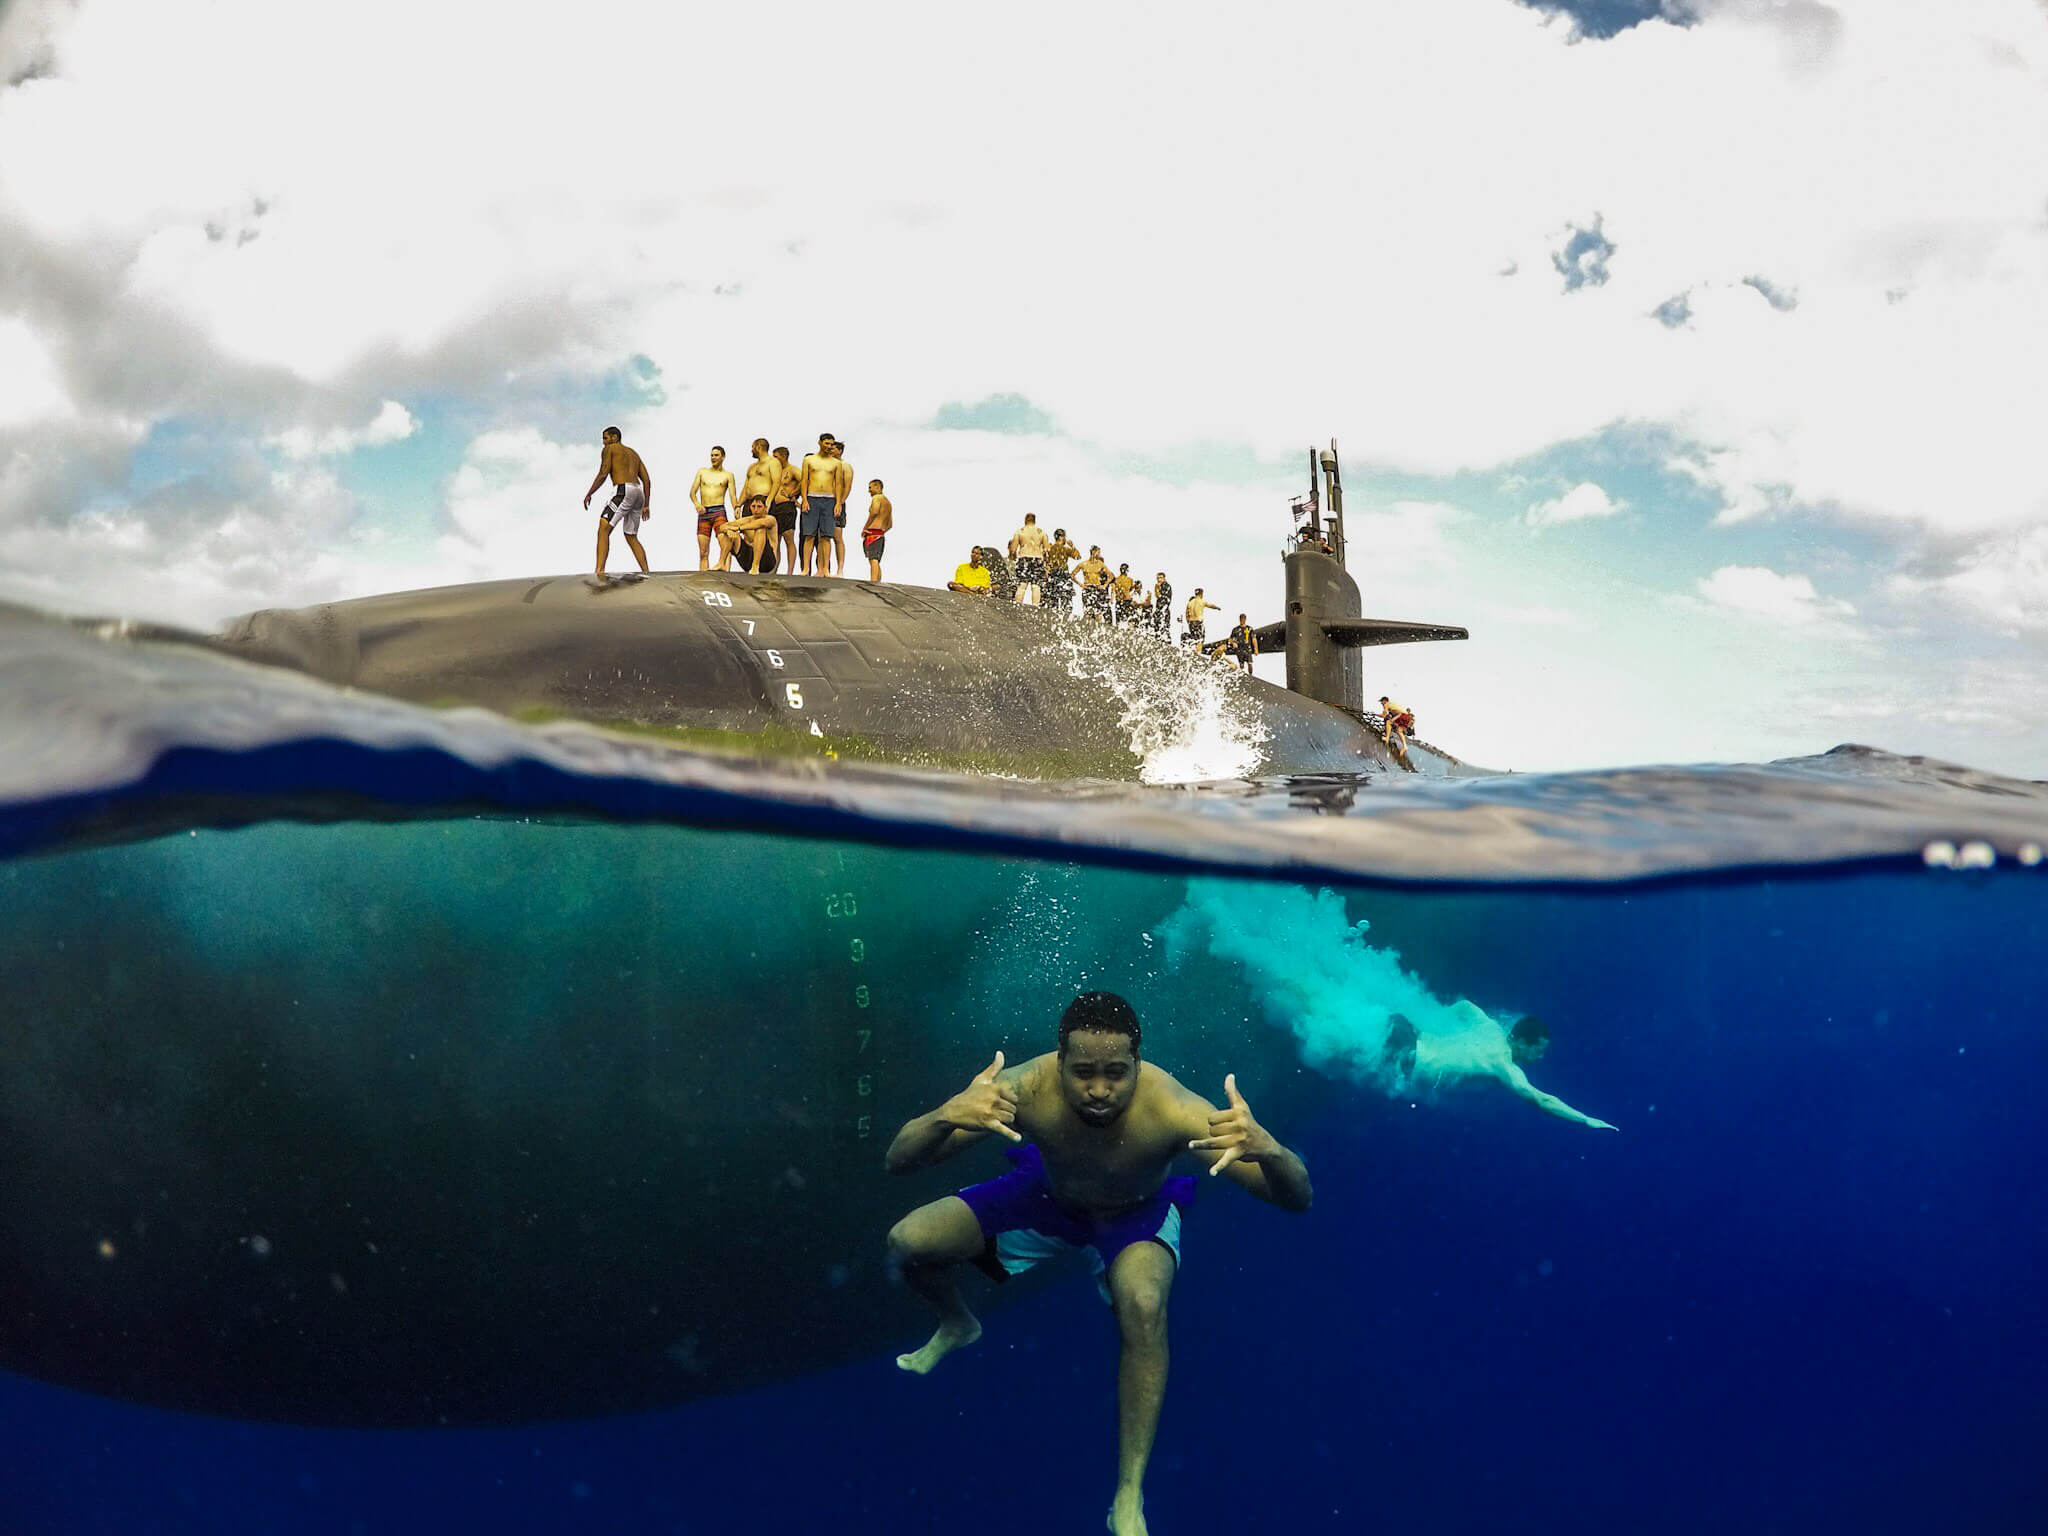 Lindley-French-Sailors assigned to Los Angeles-class fast-attack submarine USS Olympia (SSN 717) participate in a swim call in the Pacific Ocean in 2018. U.S. Pacific Fleet 